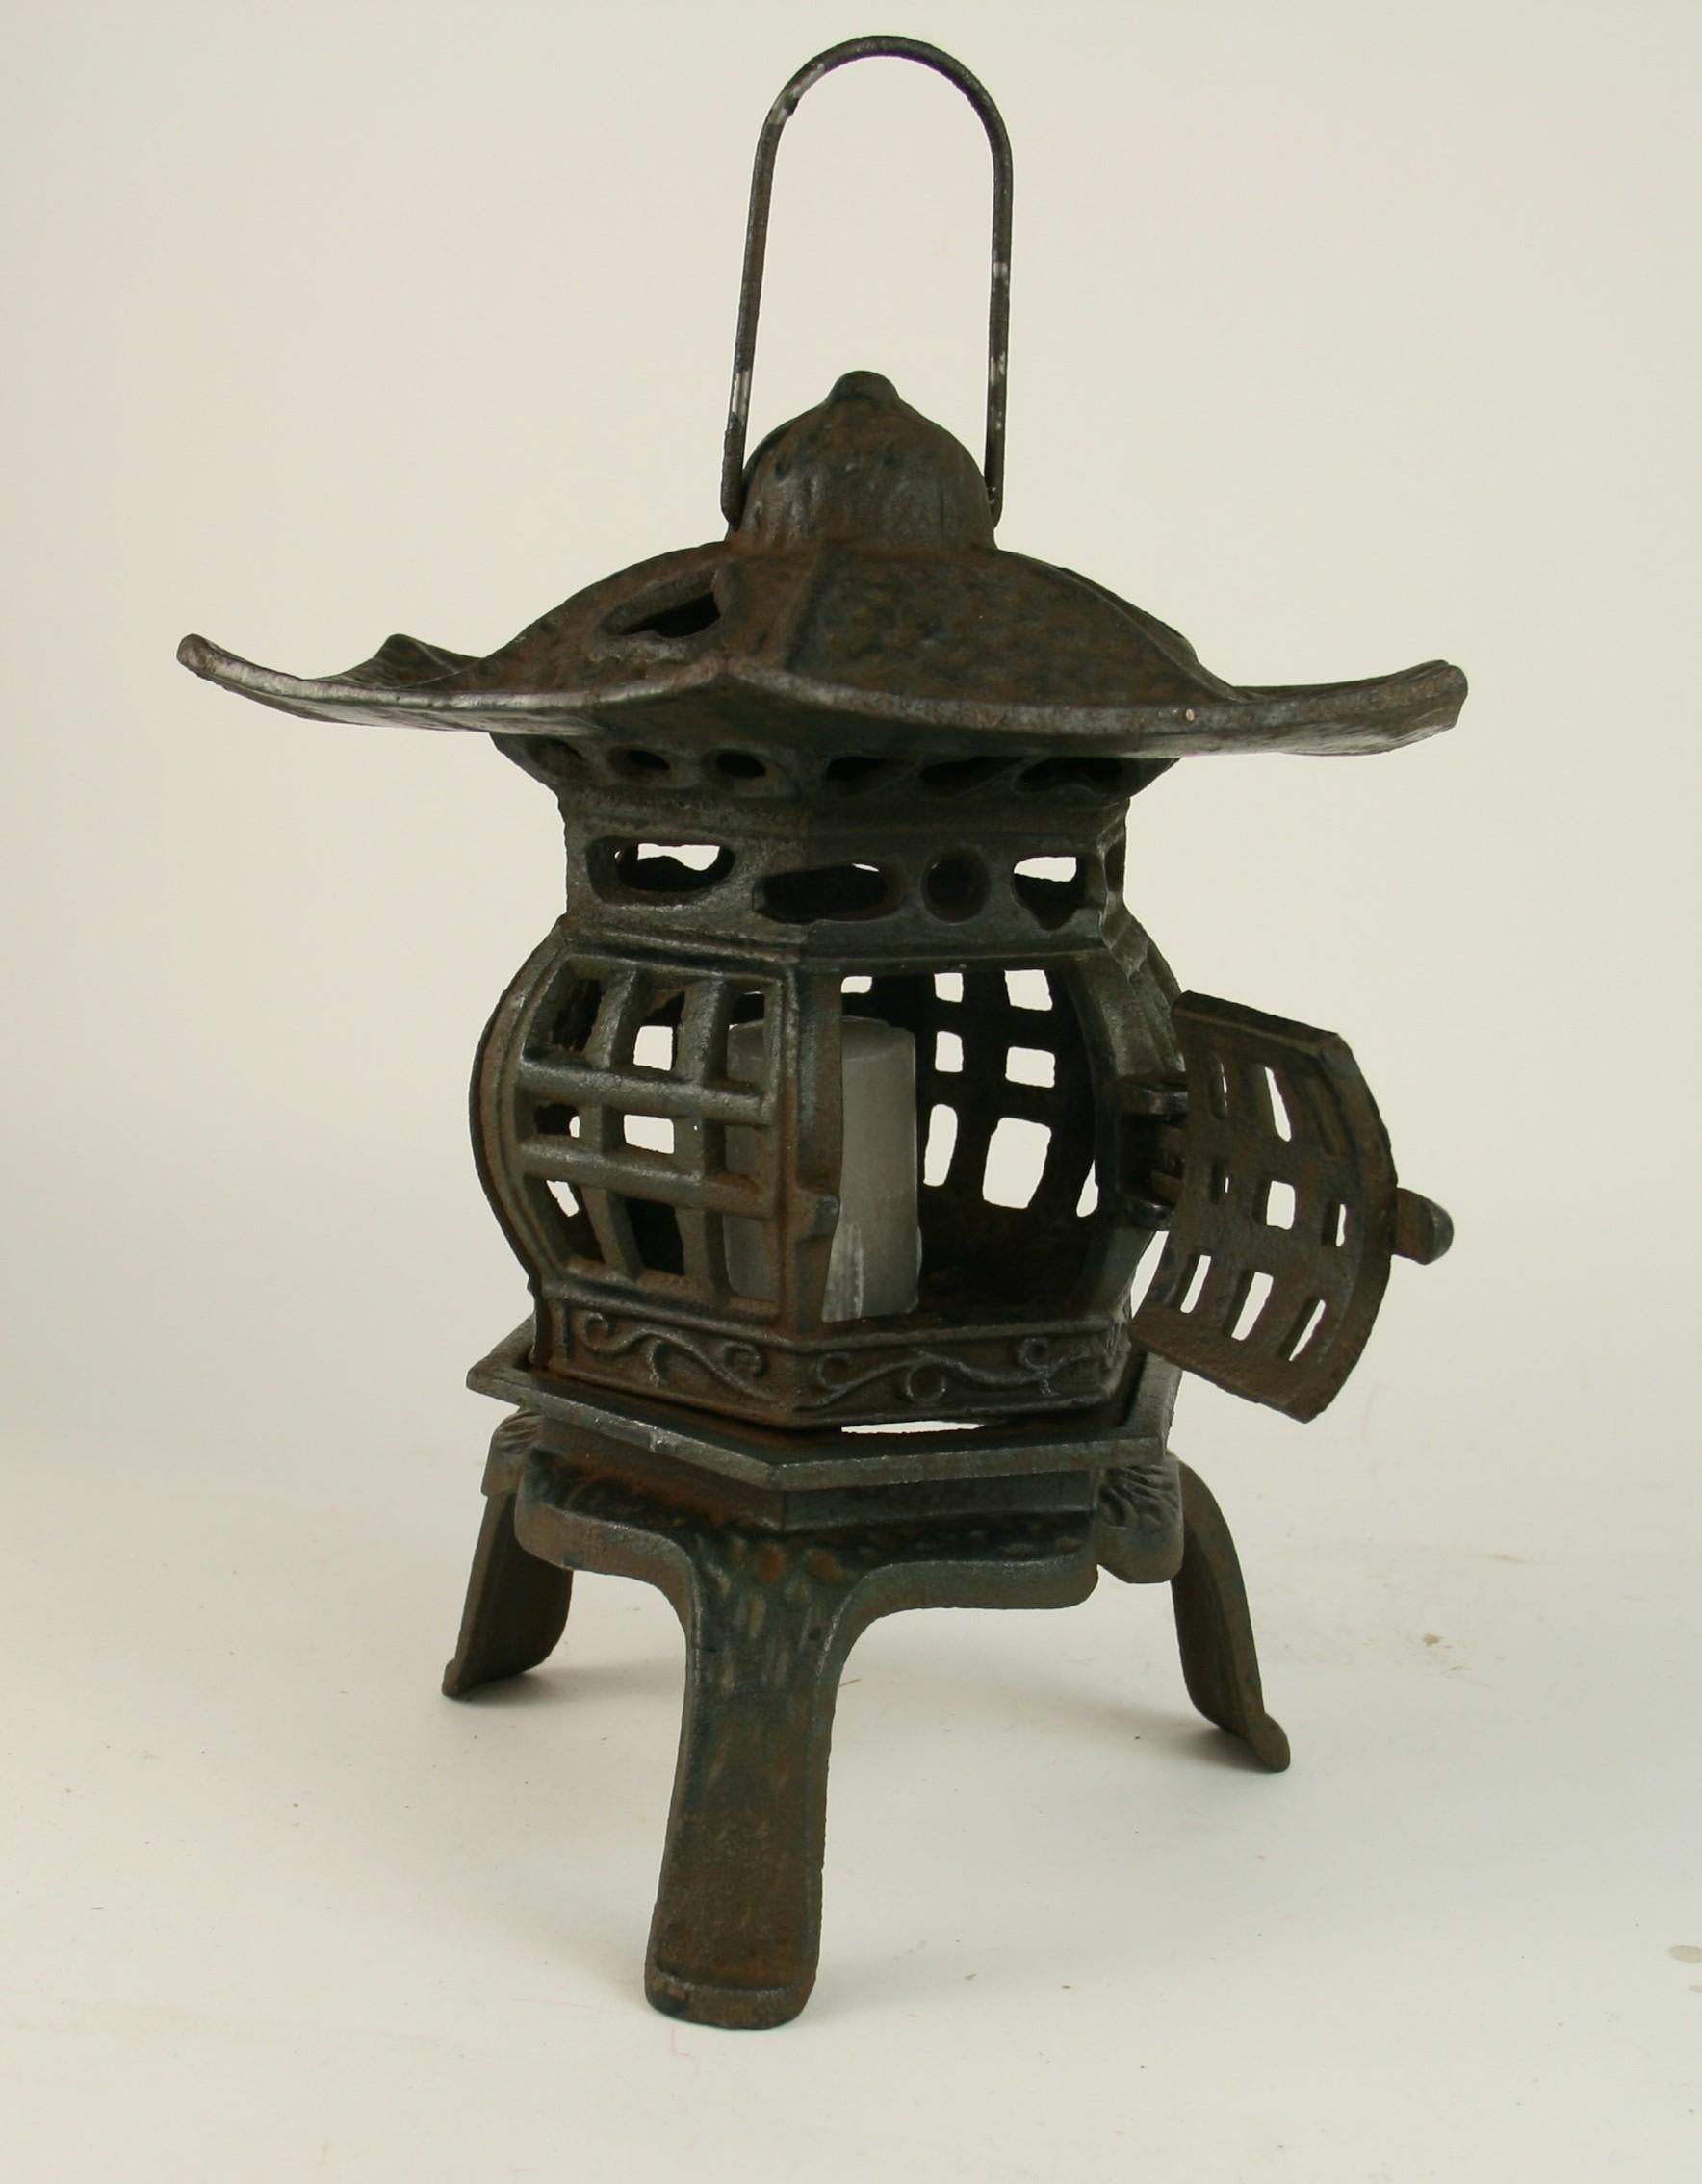 3-422, Japanese iron pagoda garden candle lantern
Can rest on table or hanged by loop
Measures: Height to of loop 13